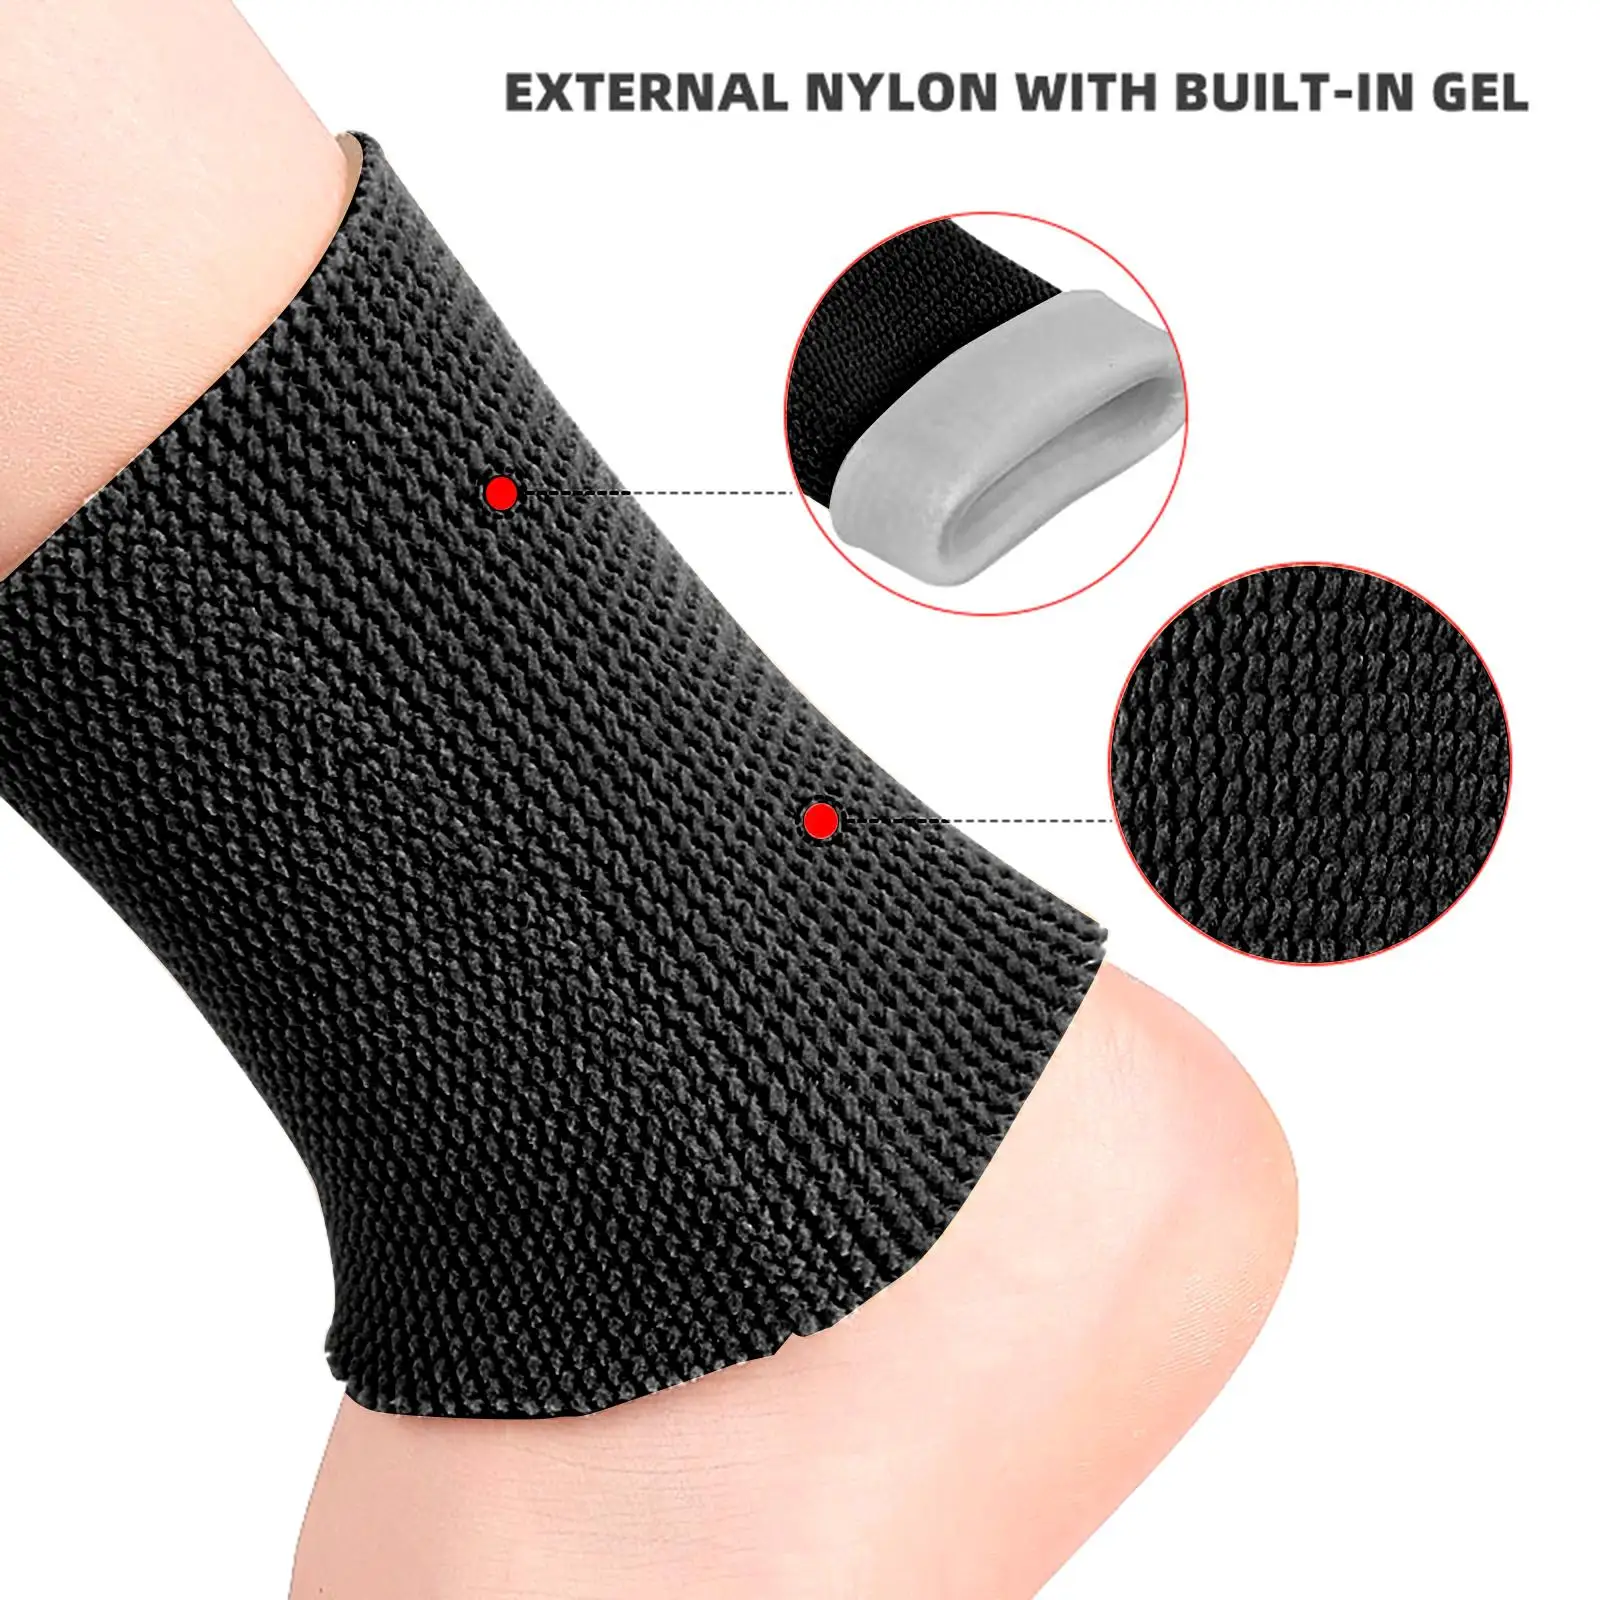 Ankle Brace Sleeve Elastic Wrap Comfortable Breathable Soft Ankle Support for Cycling Football Volleyball Fitness Gym